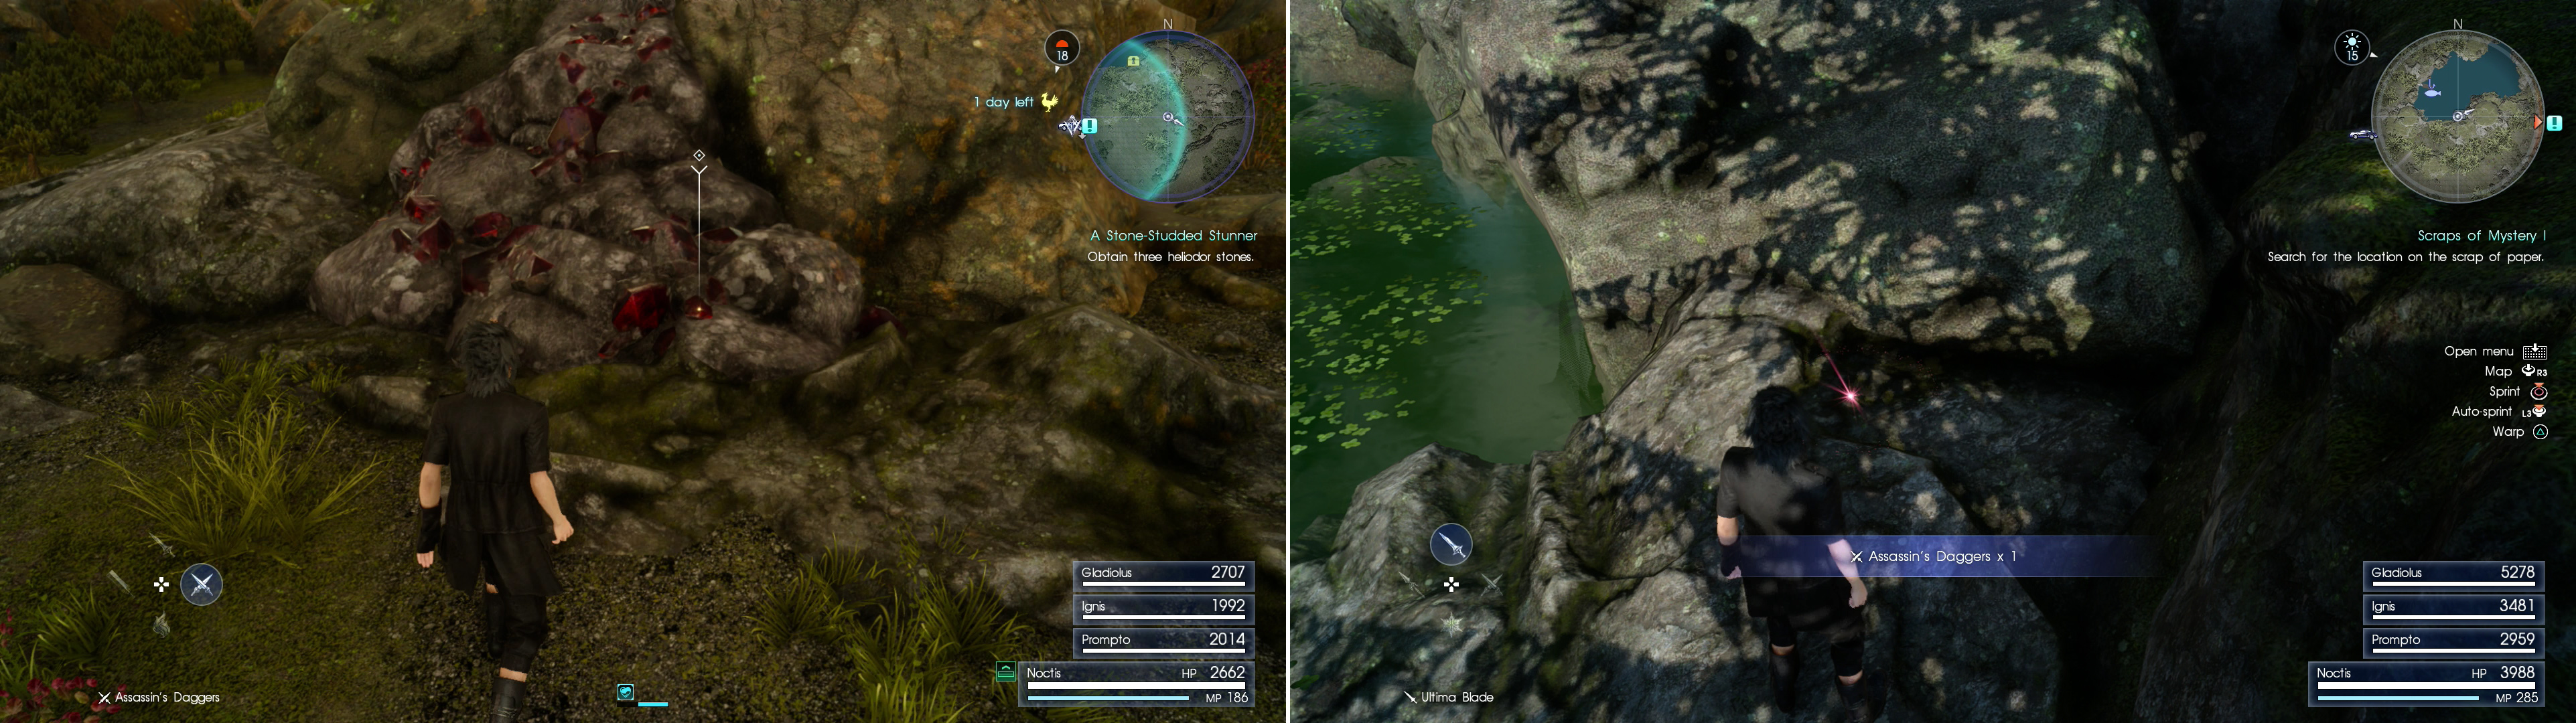 You’ll find the mineral deposits that contain Dino’s stones near the Swainsmere Fishing Spot (left). You can also grab some Assassin’s Daggers while you’re here - a free upgrade for Noctis and Ignis (right).